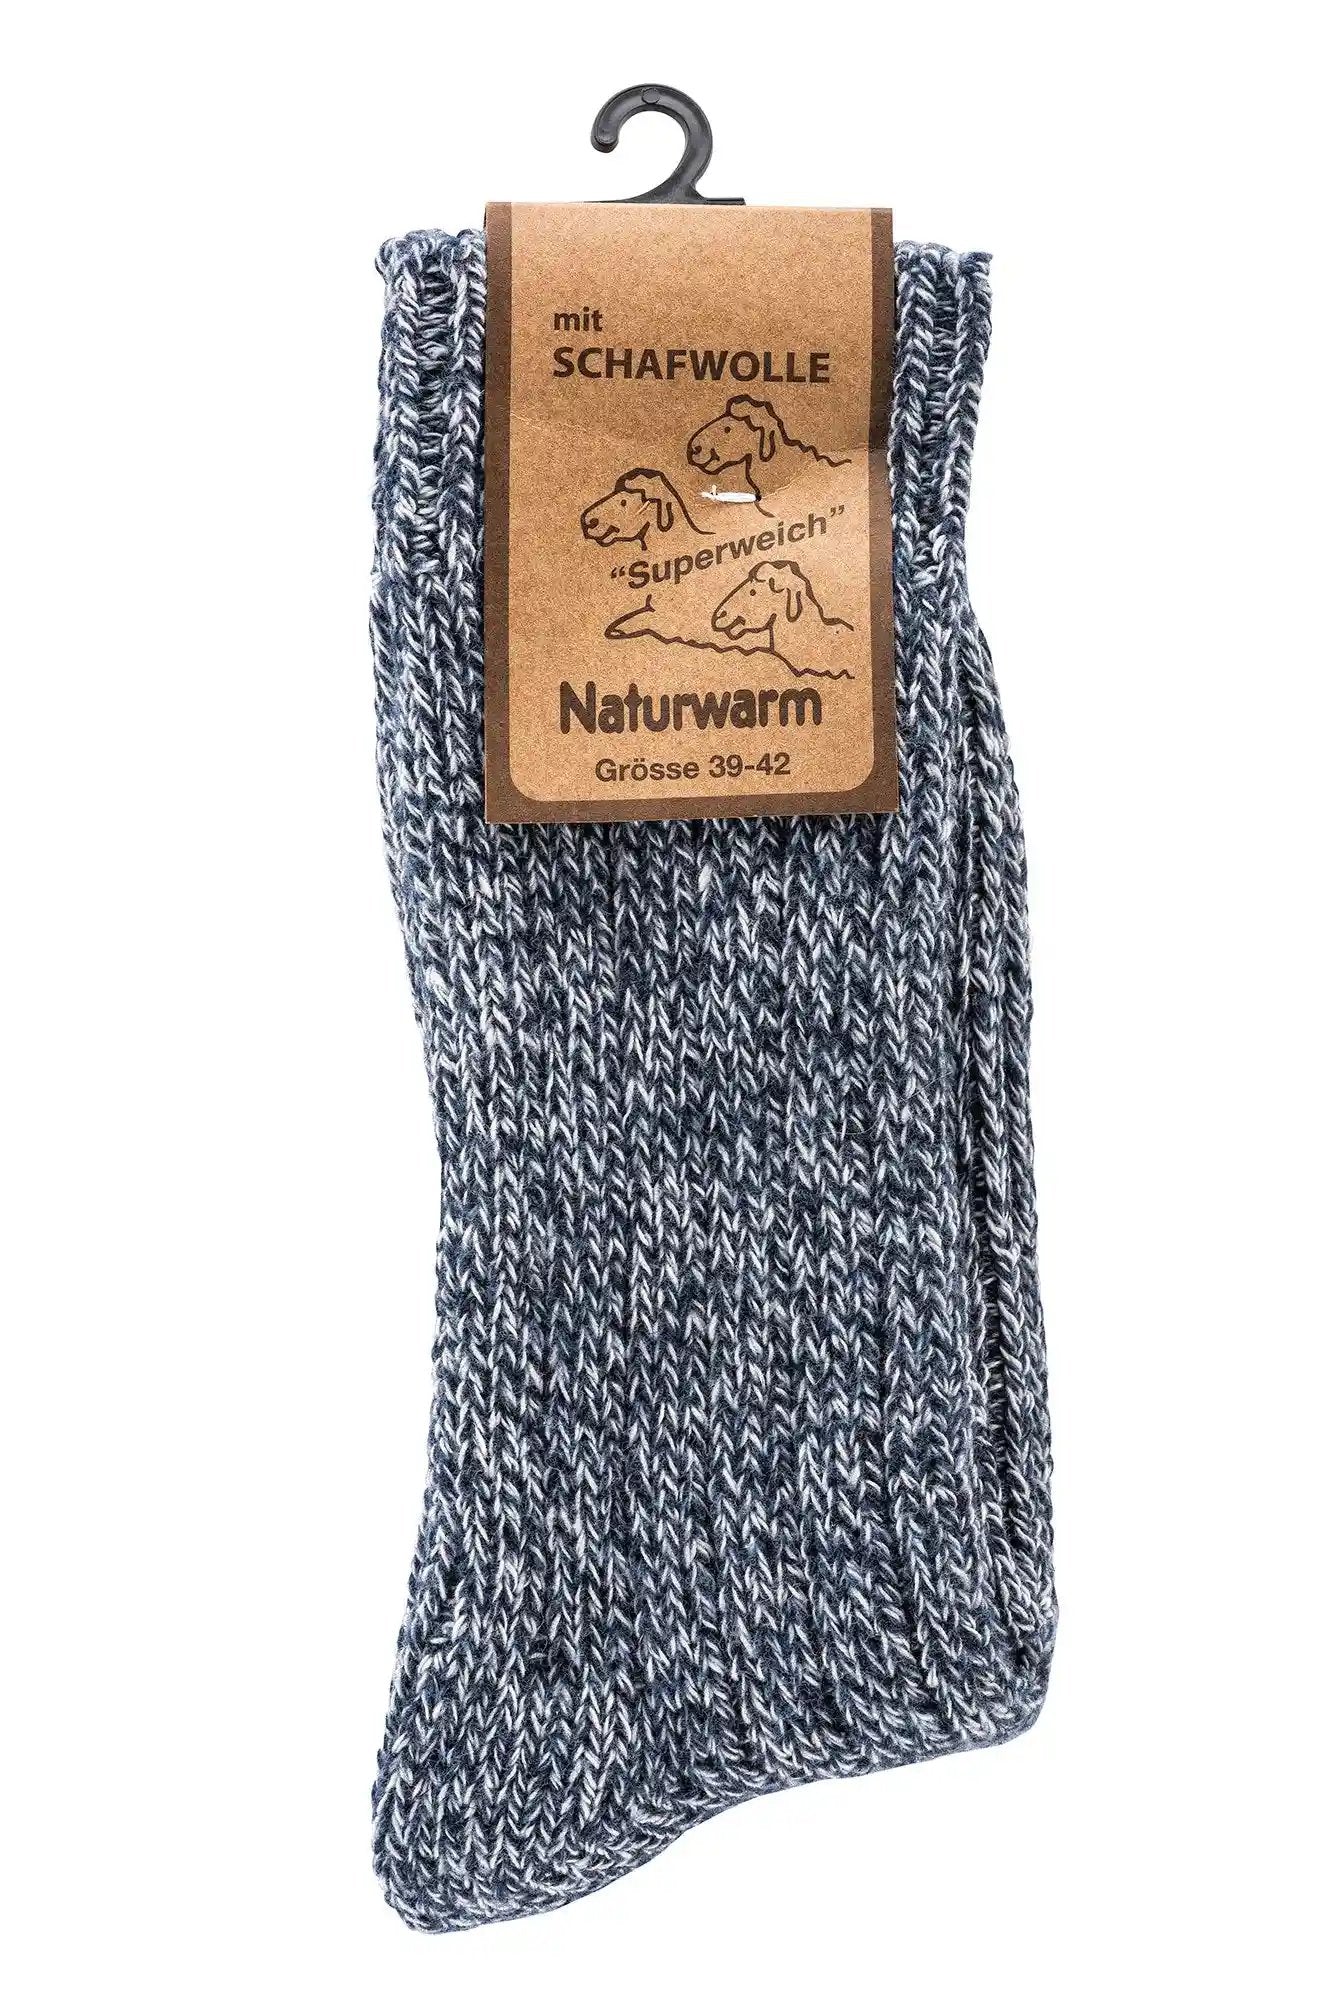 3 or 6 pairs of warm soft Norwegian socks with wool cotton viscose